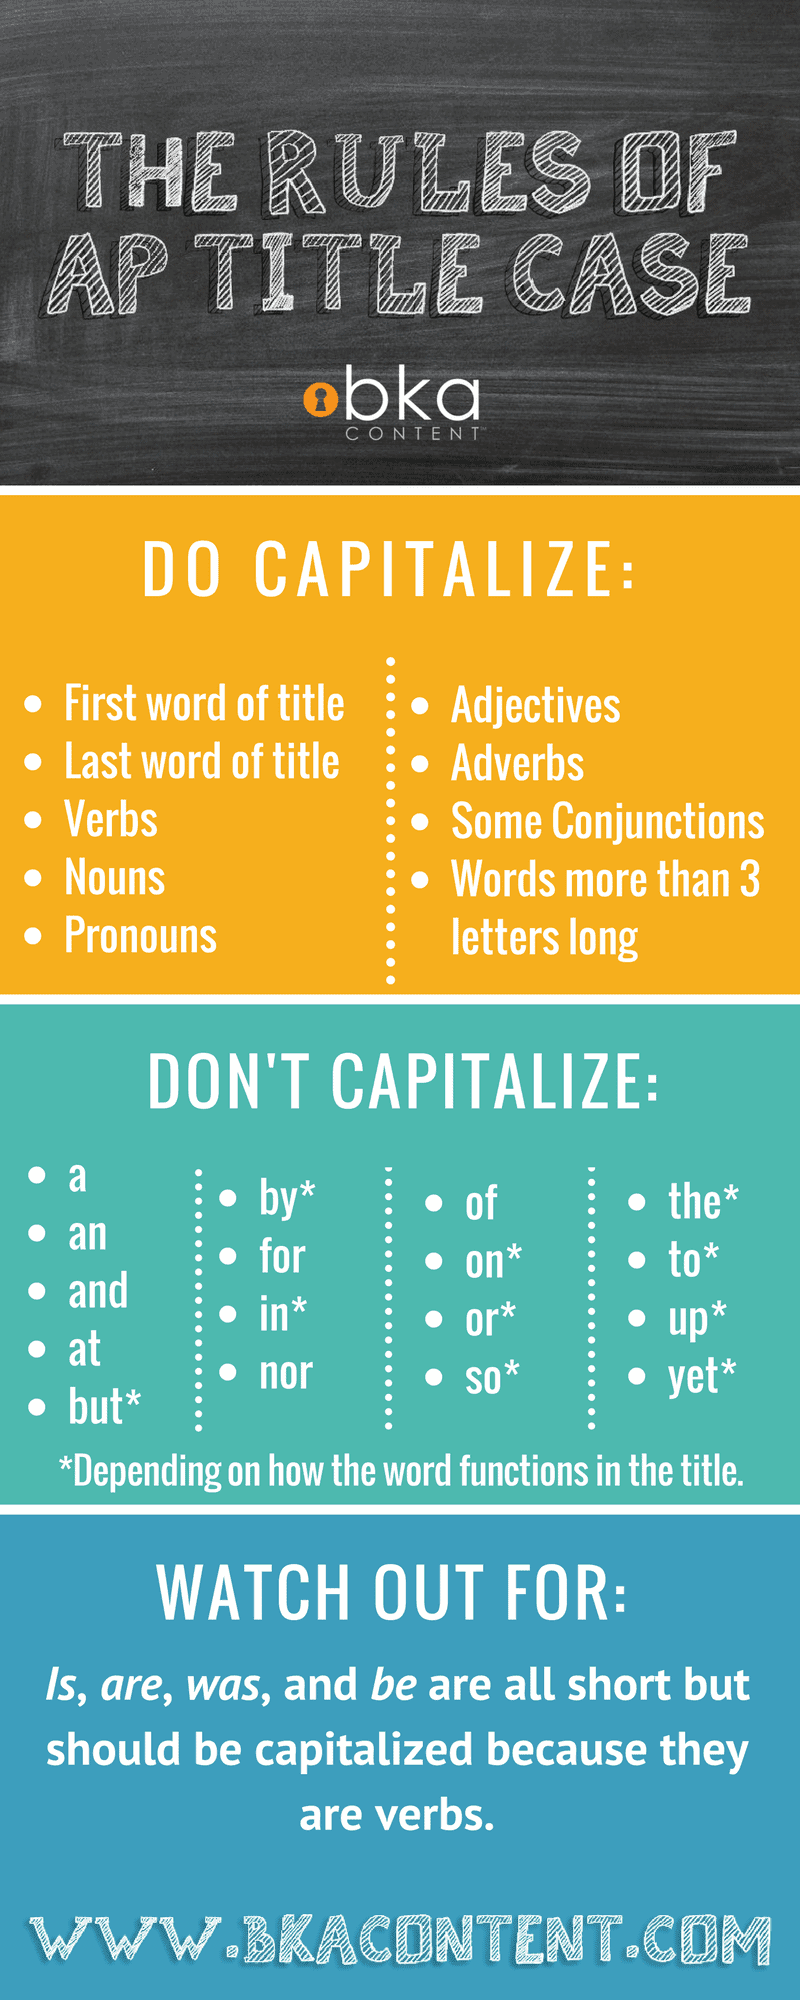 thesis titles capitalized